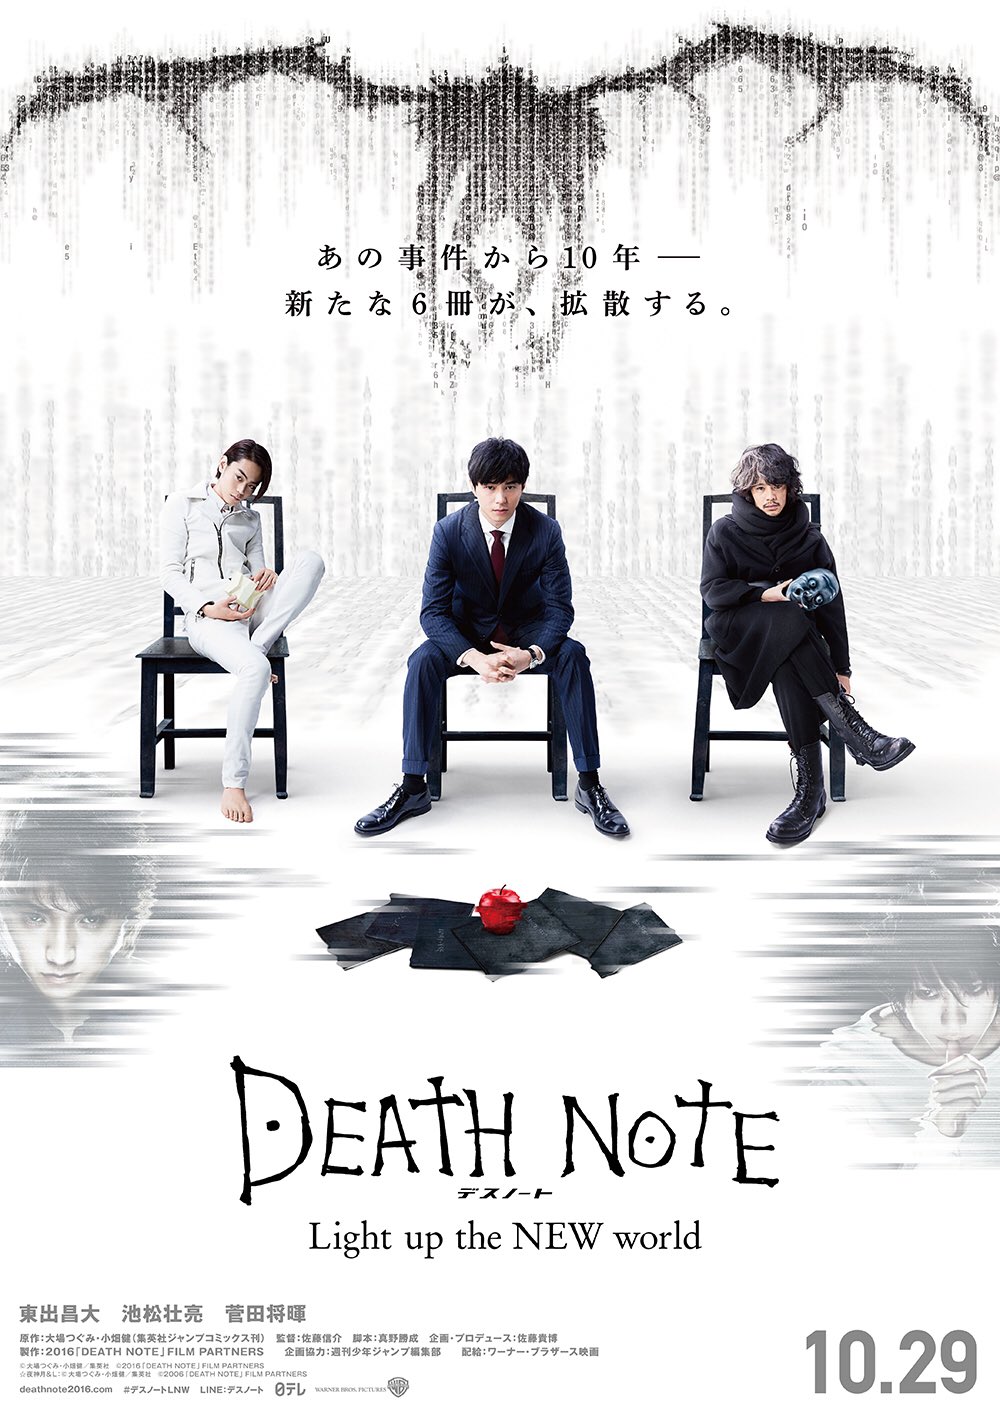 Anime Your Way: From manga to animeto live-action: Death Note  live-action movie impressions